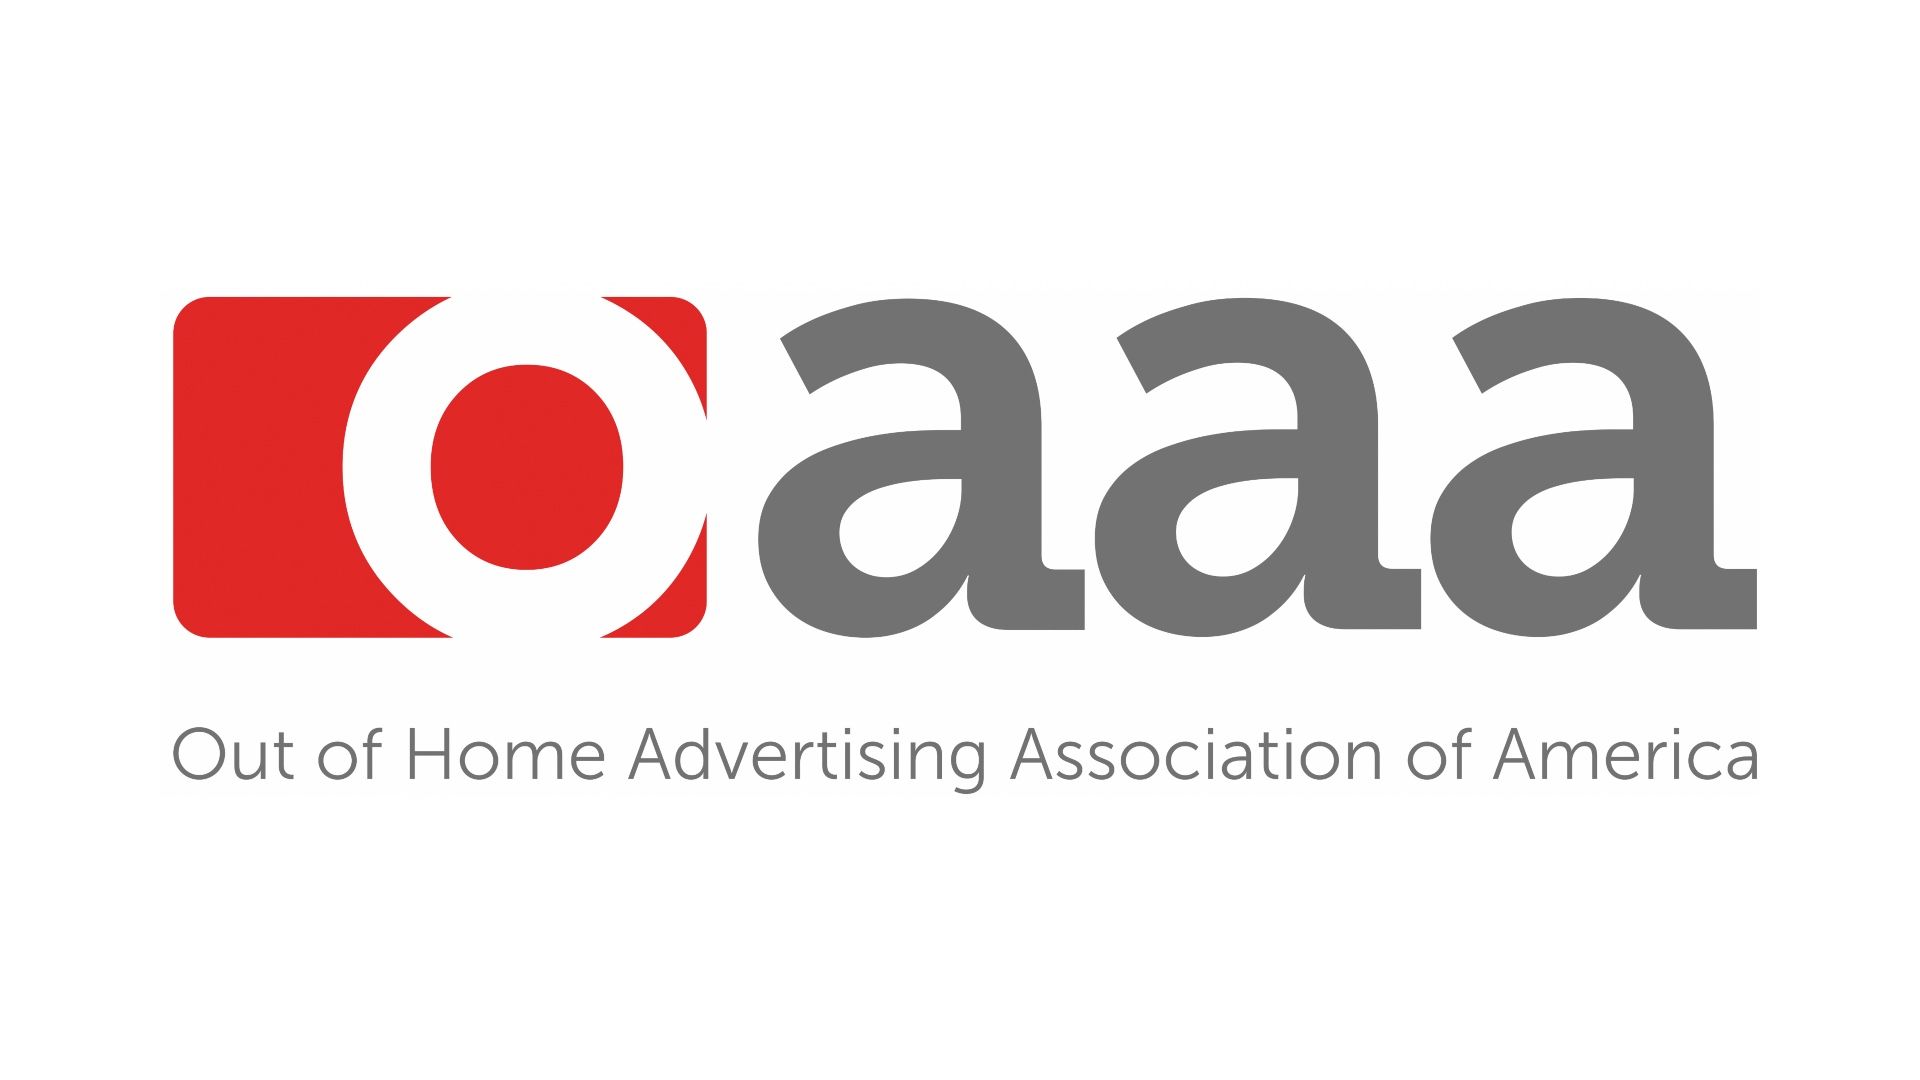 Out of Home Advertising Association